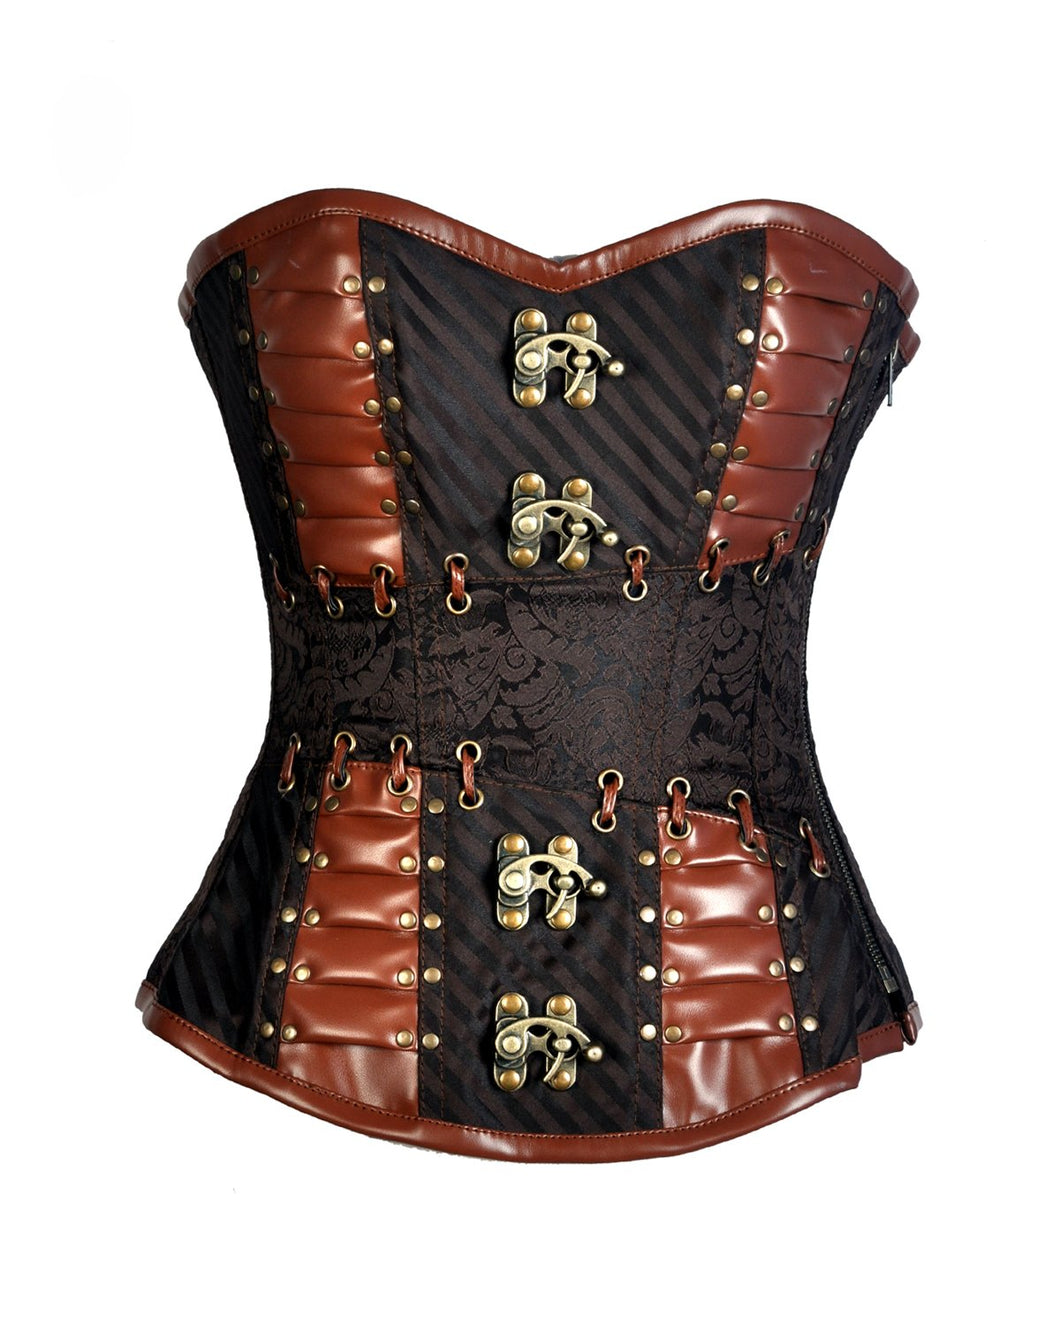 Serry Coffee Brocade & Faux Leather Steampunk Corset - Shearling leather